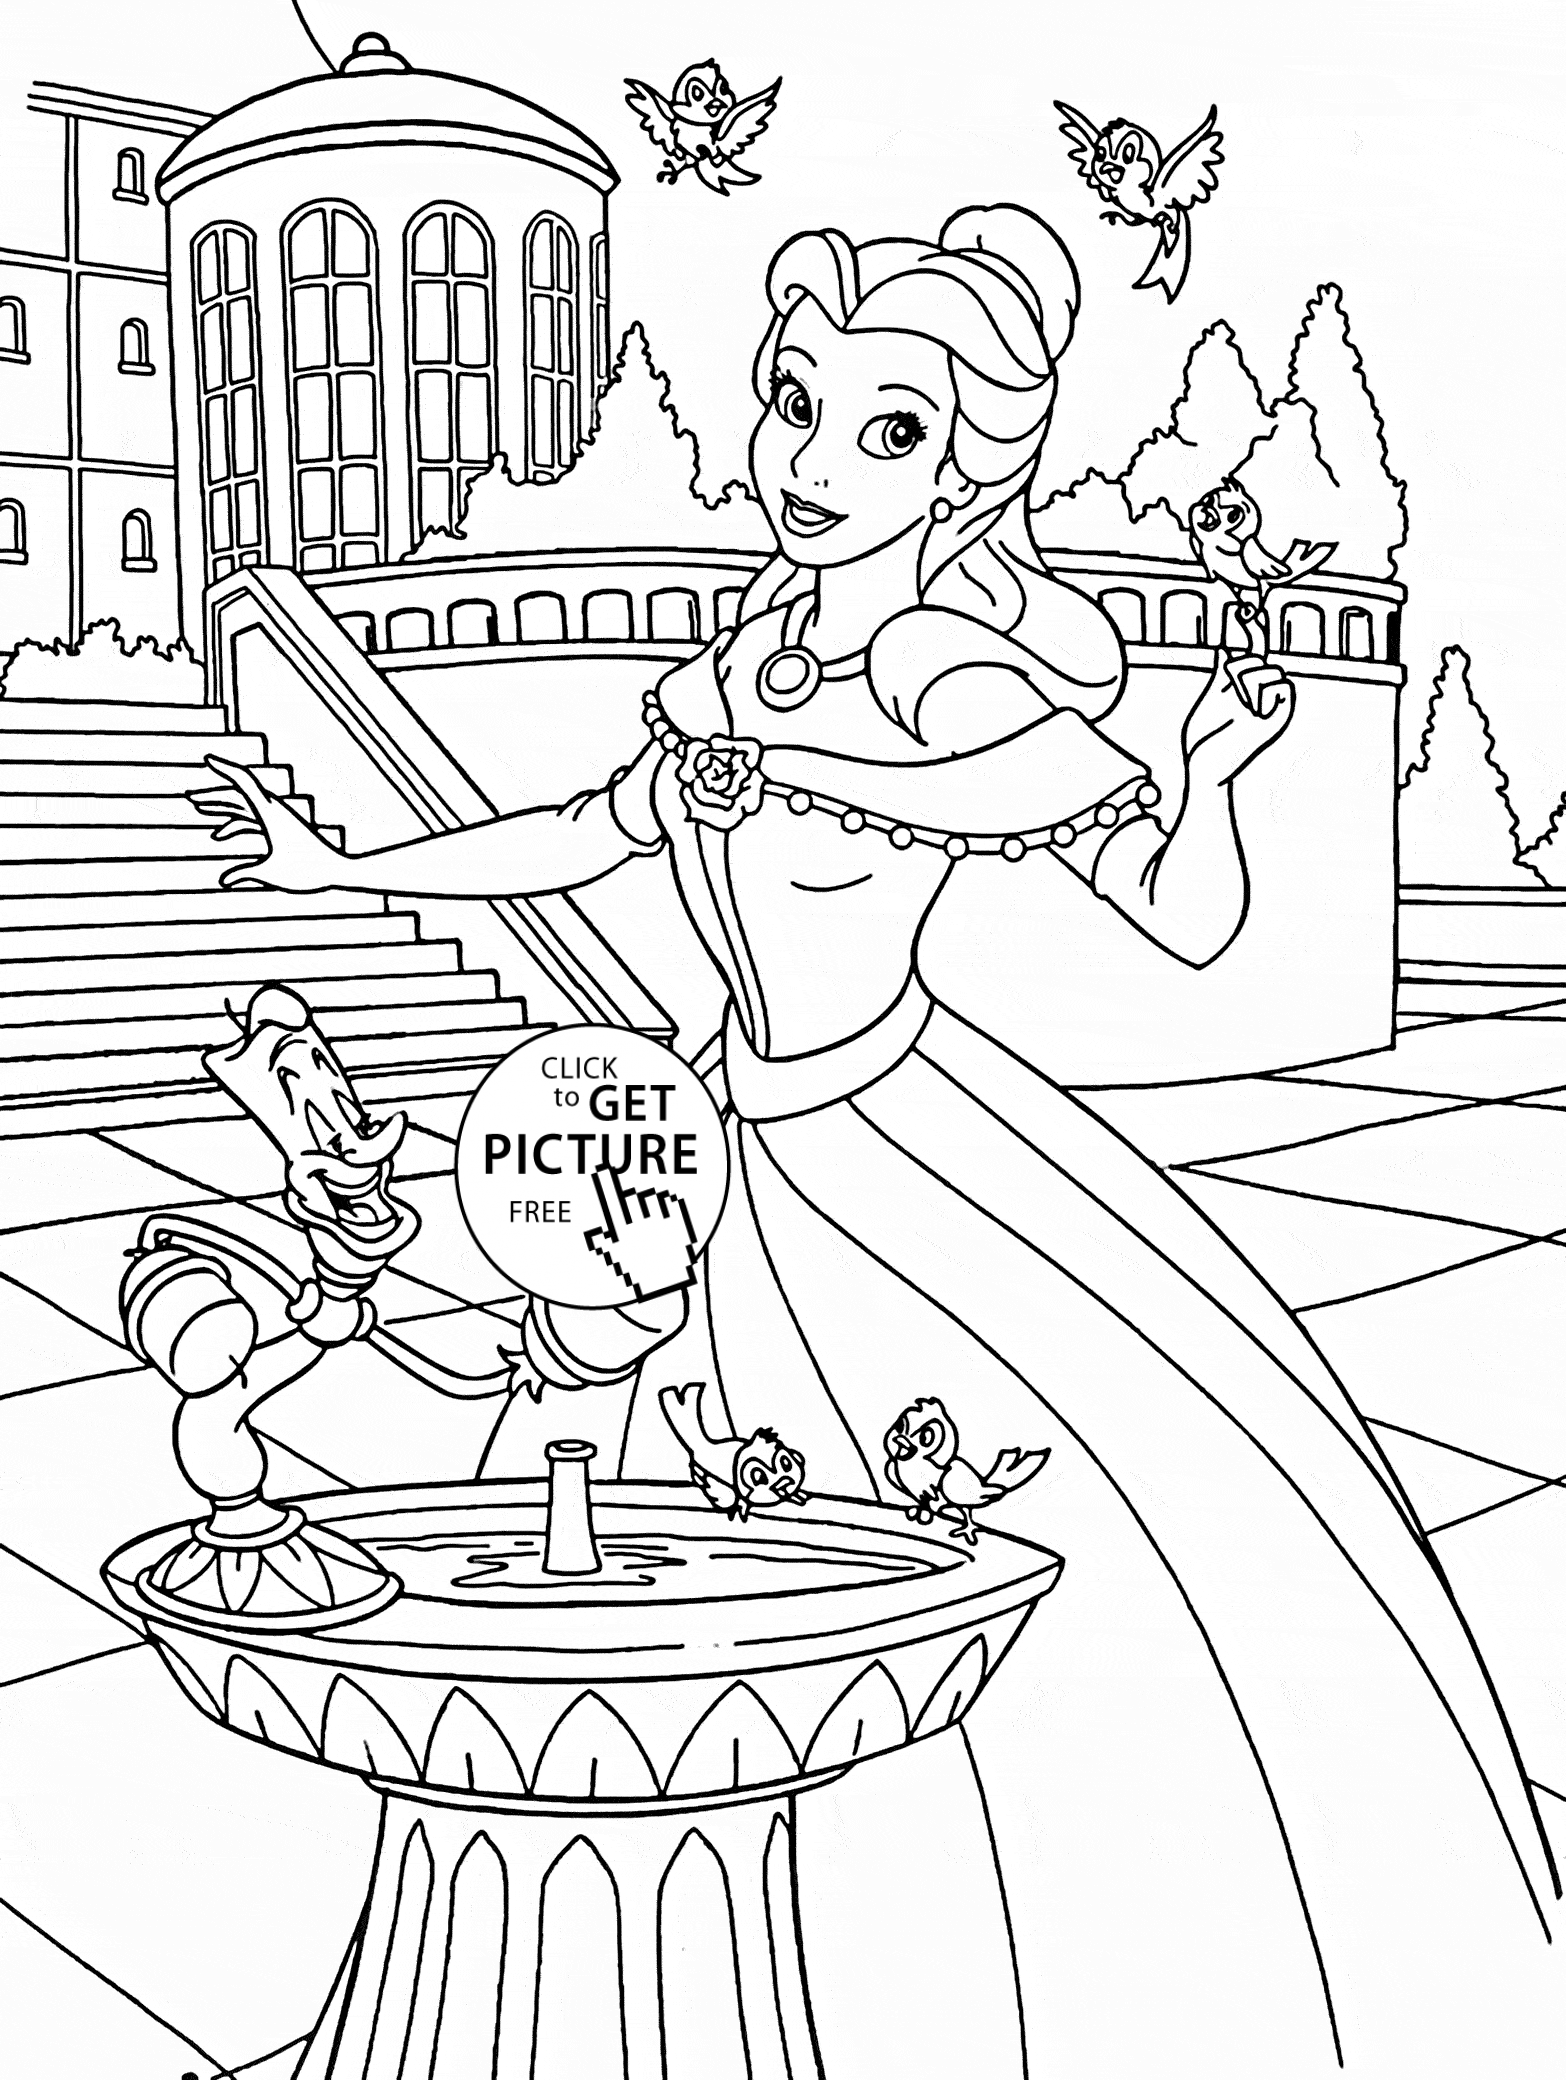 princess castle colouring pages colouring pictures of castles with princesses pages princess castle colouring 